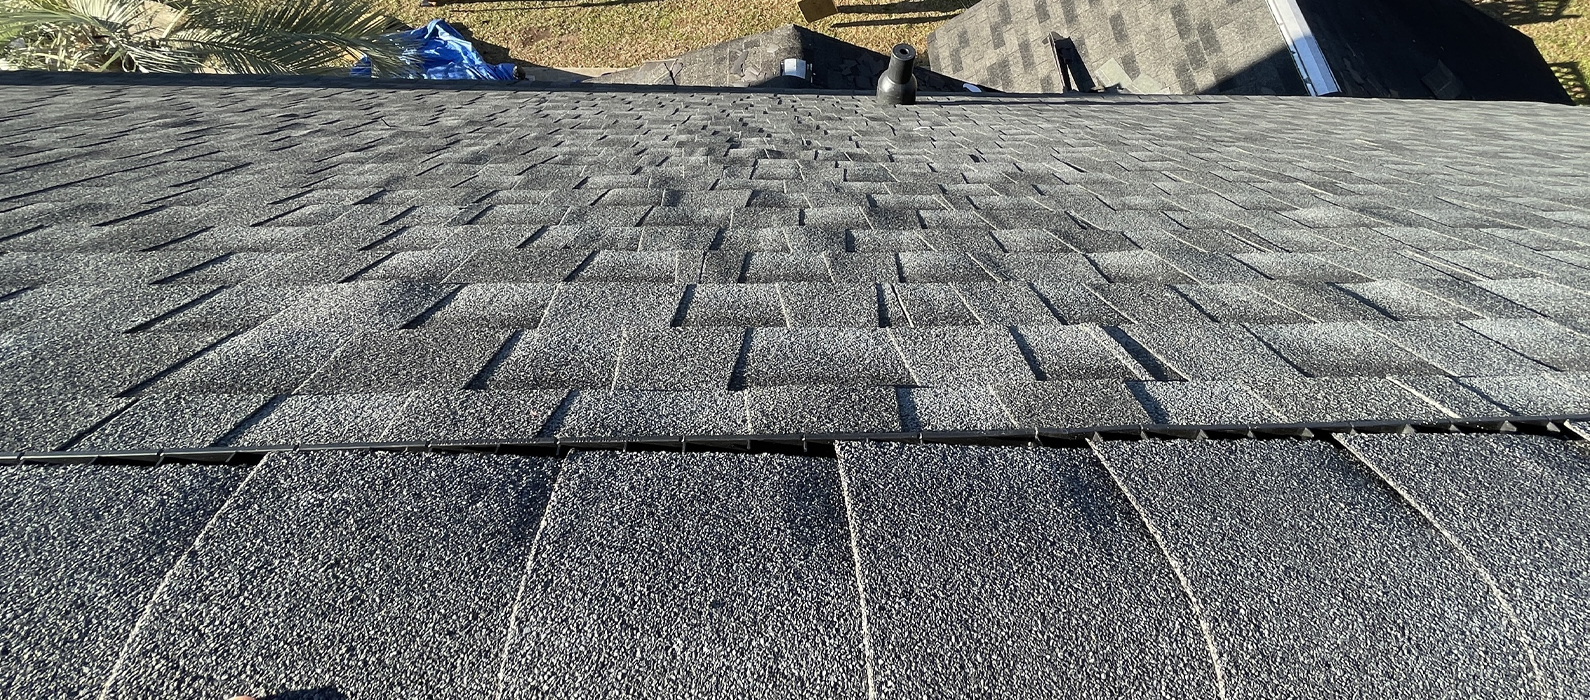 New shingles are so pleasing